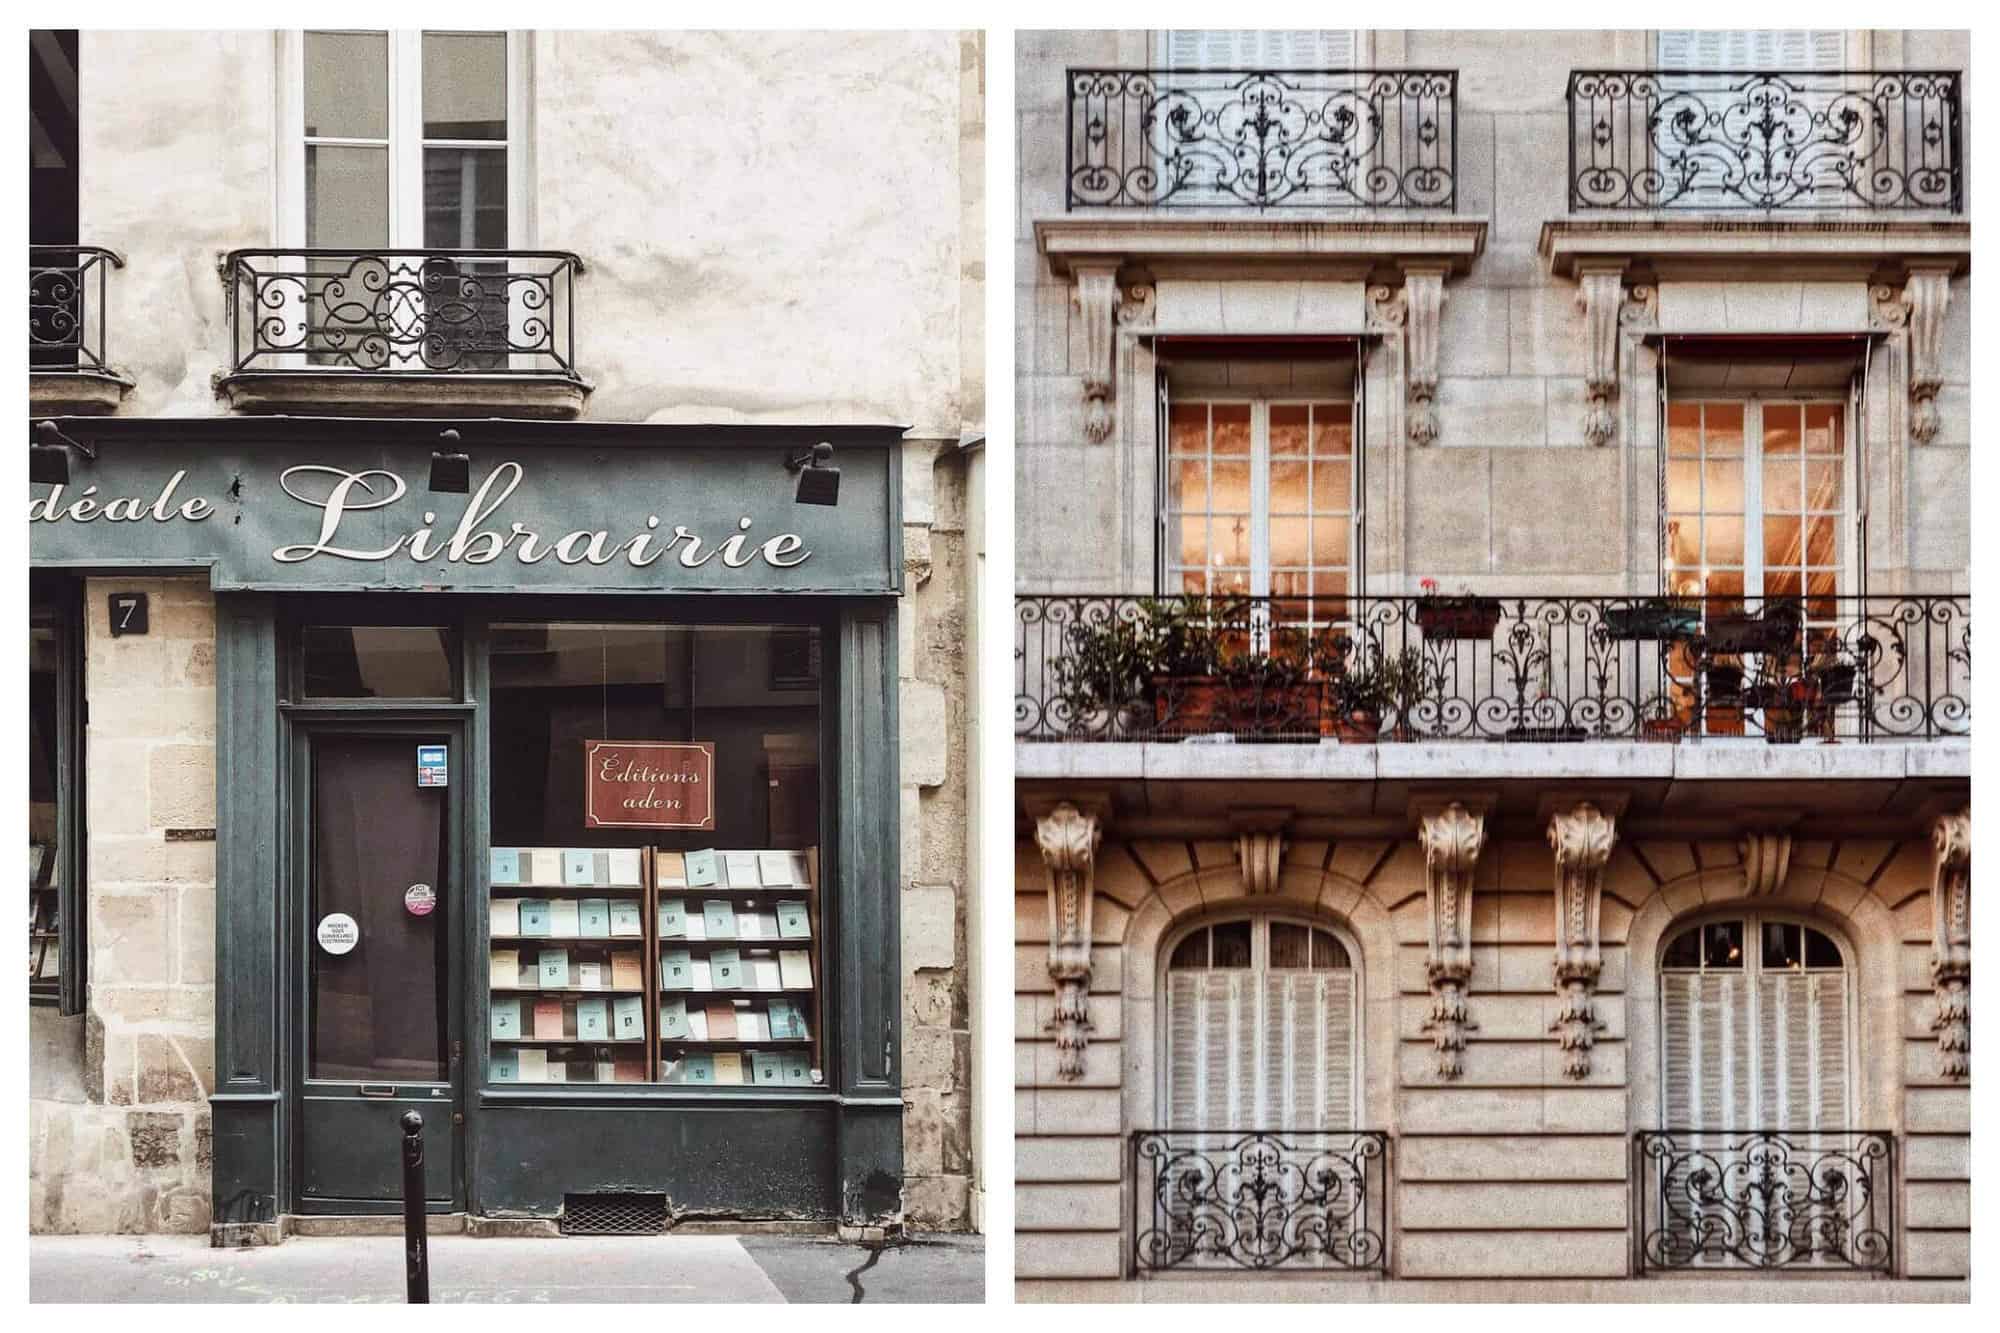 Left: a bookstore in Paris. The French word for bookstore, "librarie" is written in white on the dark green storefront which is surrounded bu white stone buildings. Books can be seen in the window. Right: a Parisian apartment building. There are four windows visible. The two closer to the top are lit up and there is greenery on their balcony. The two windows below have closed white shutters.